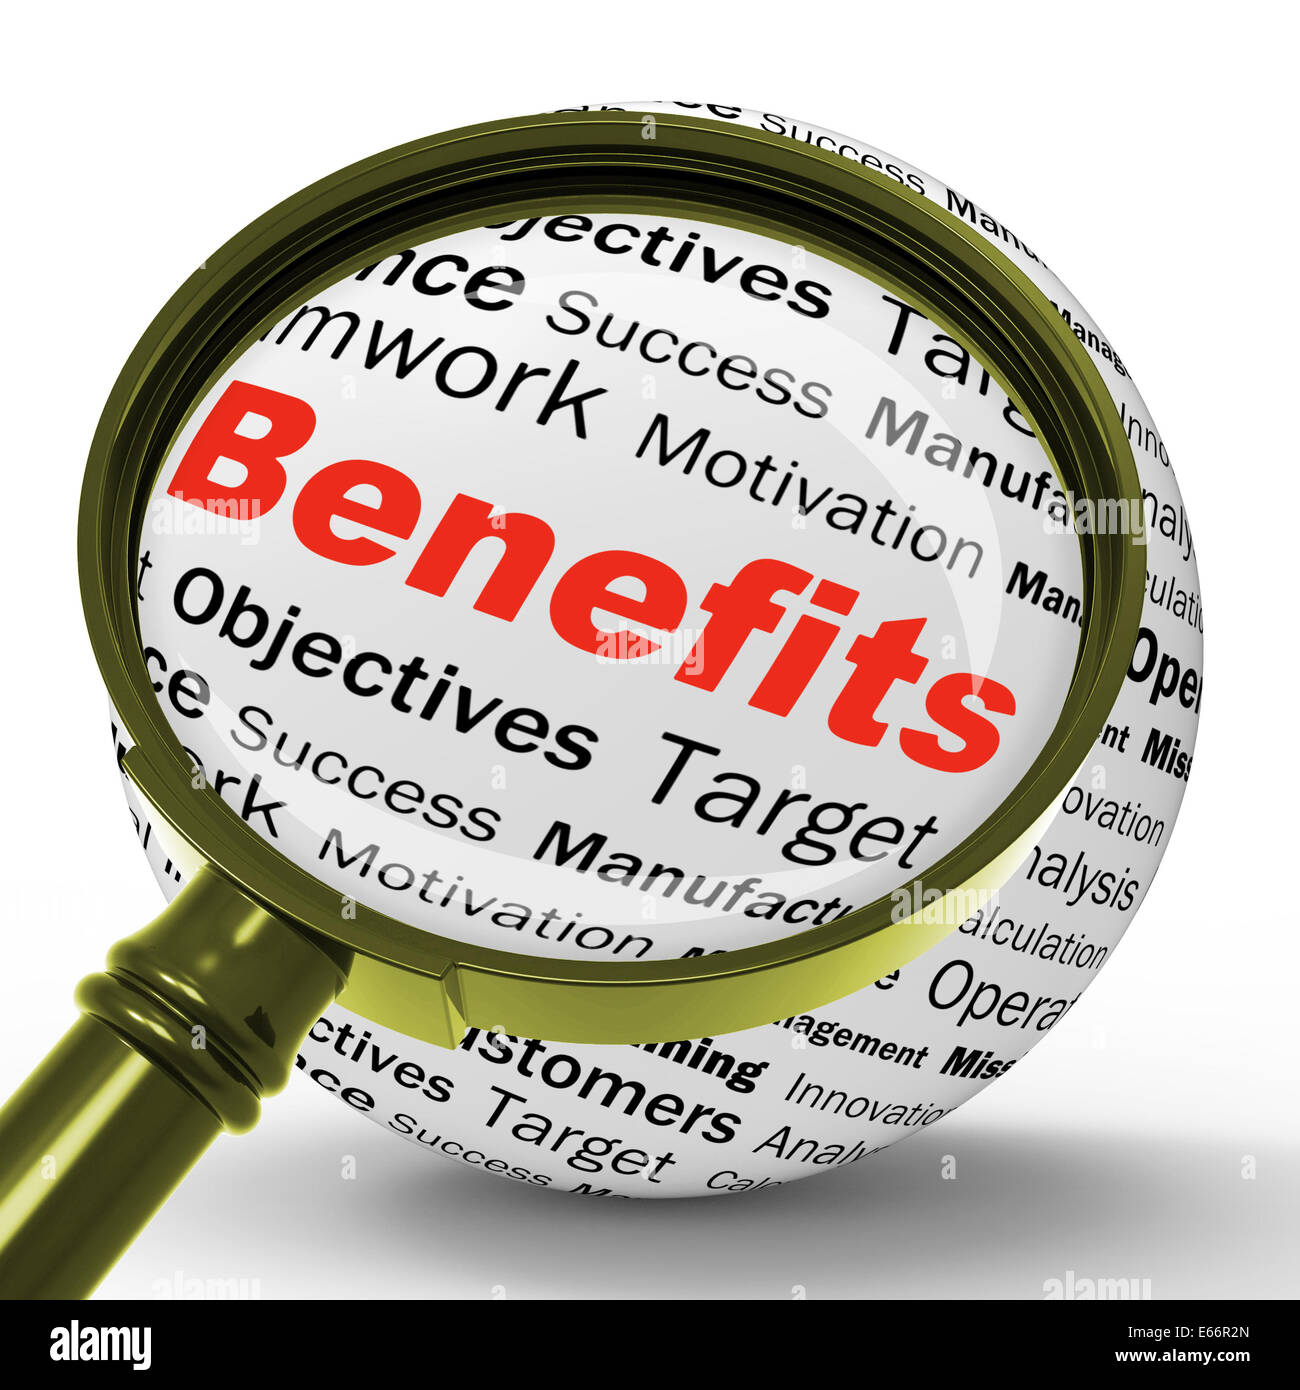 Benefits Magnifier Definition Meaning Advantages Rewards Or Monetary Bonuses Stock Photo